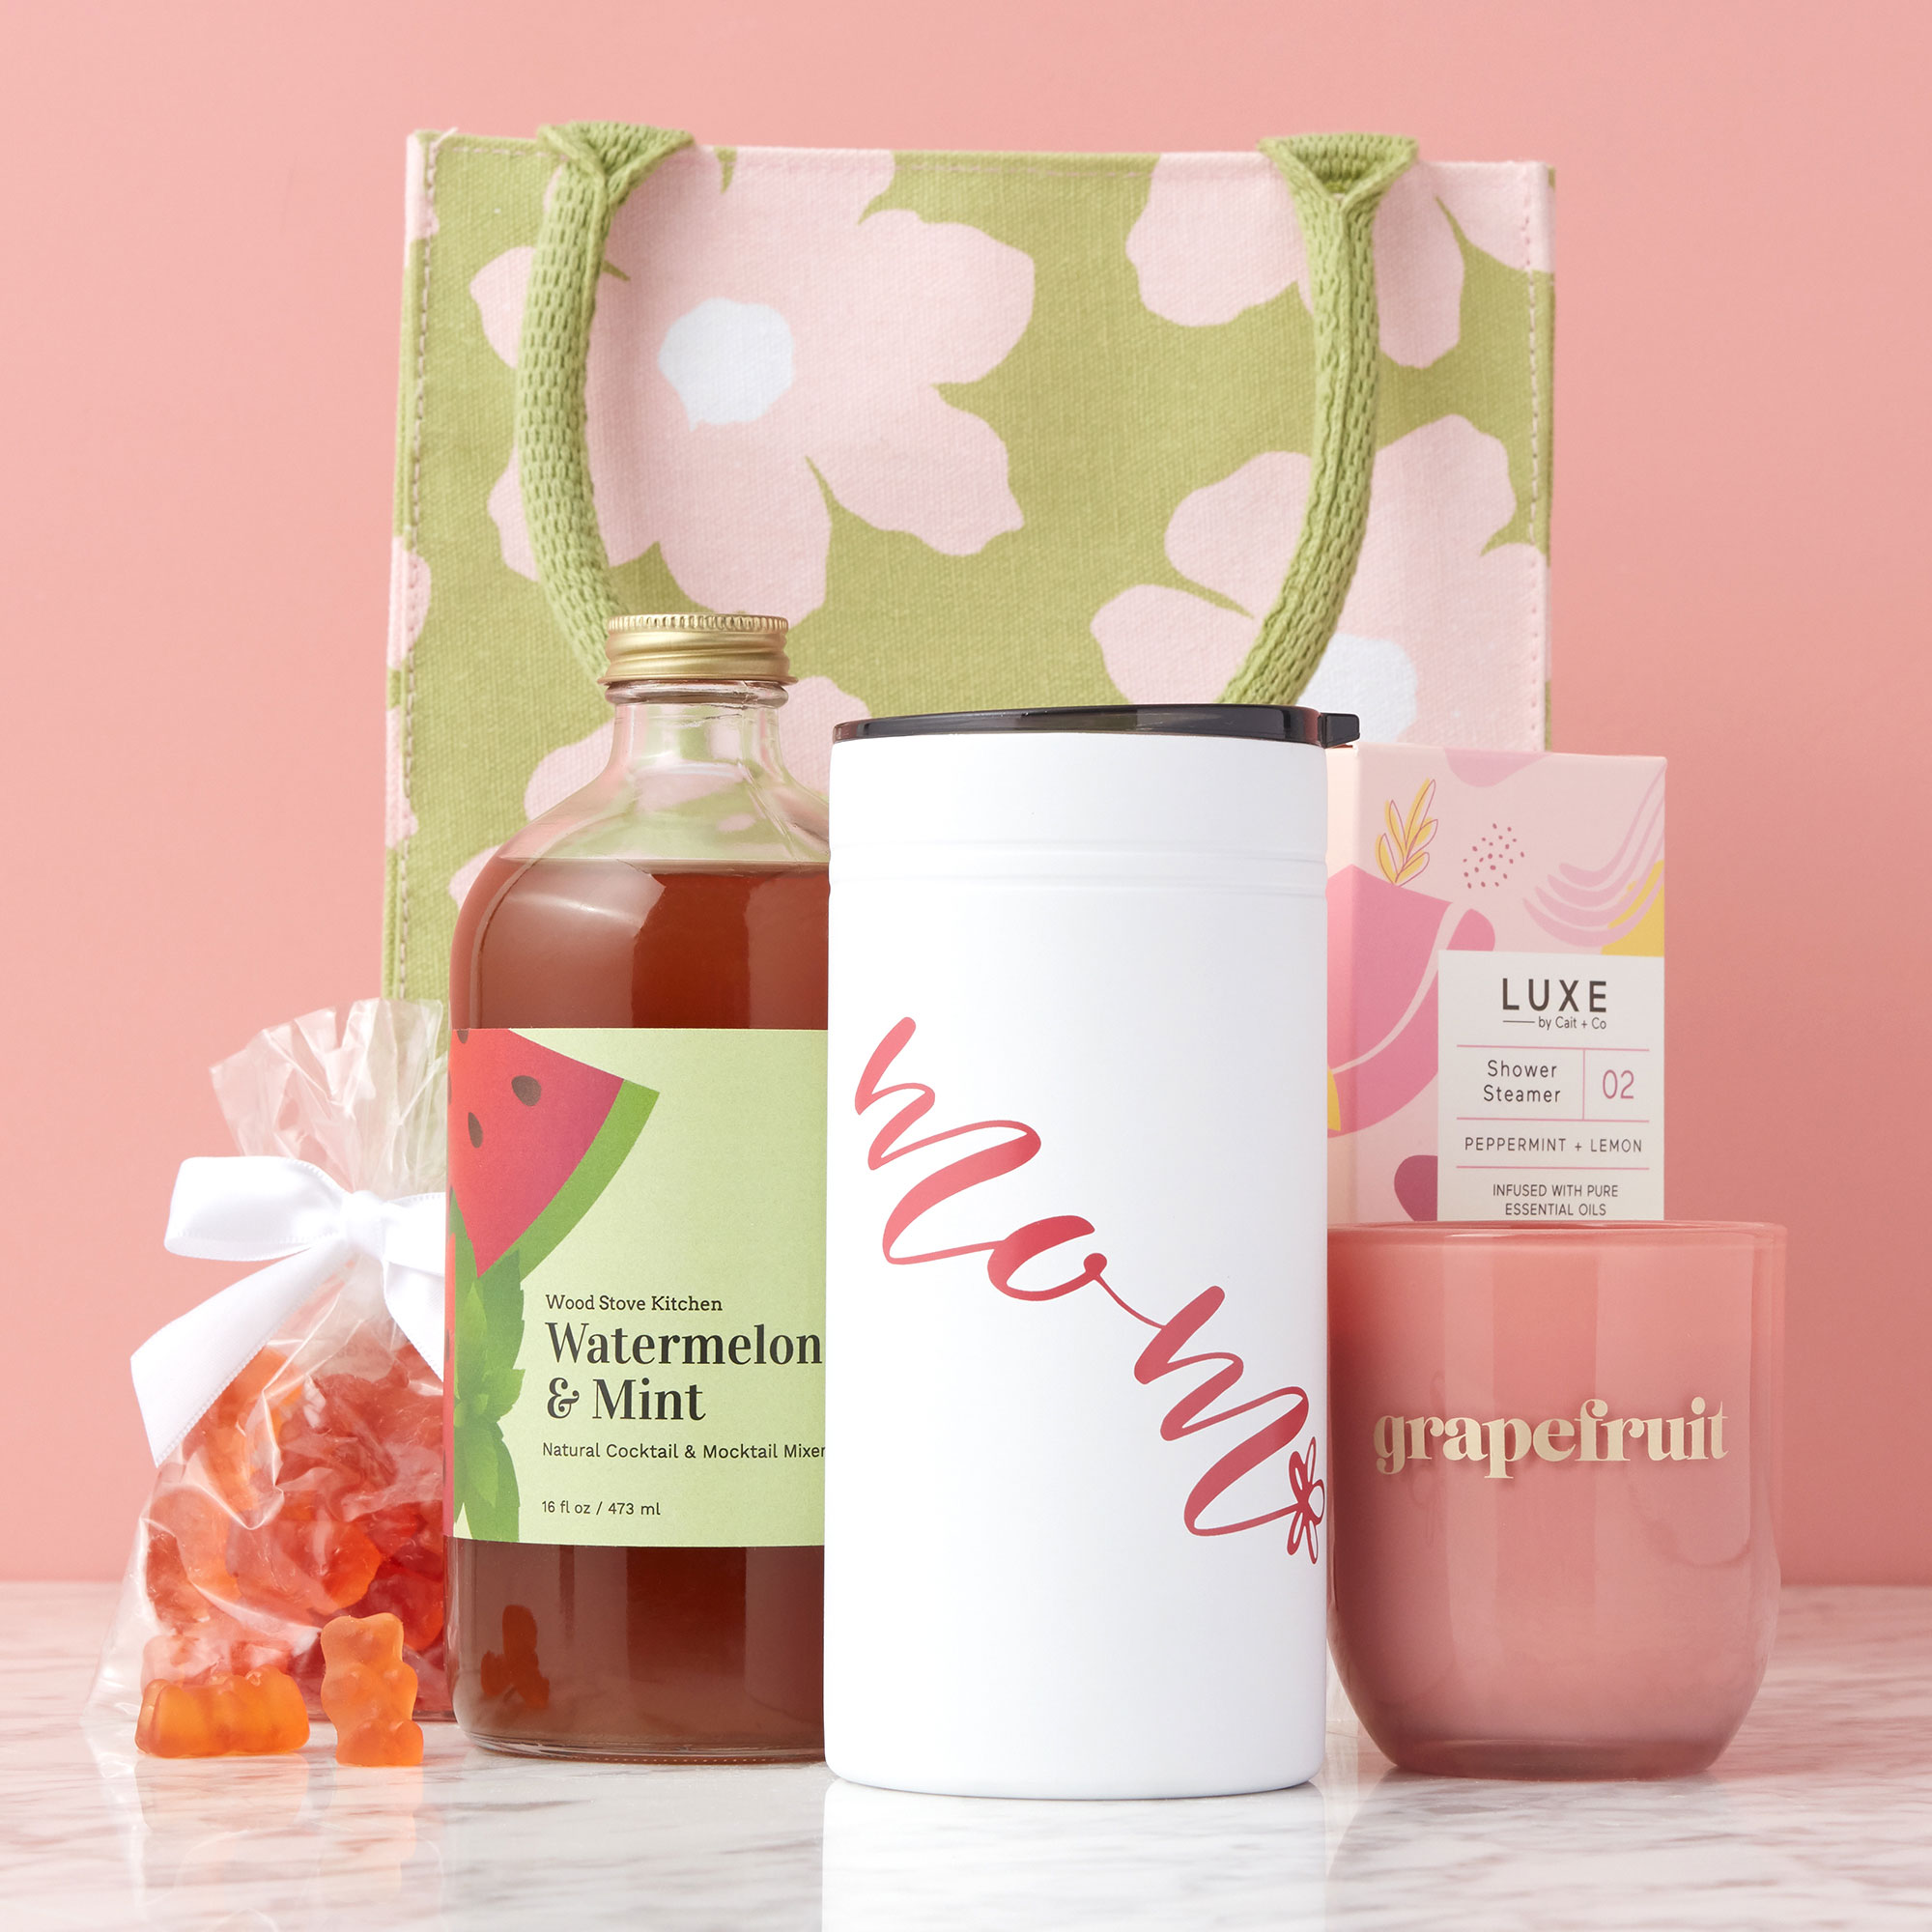 https://www.hickoryfarms.com/on/demandware.static/-/Sites-Web-Master-Catalog/default/dw12272a33/images/products/relax-unwind-mothers-day-gift-set-006472-1.jpg